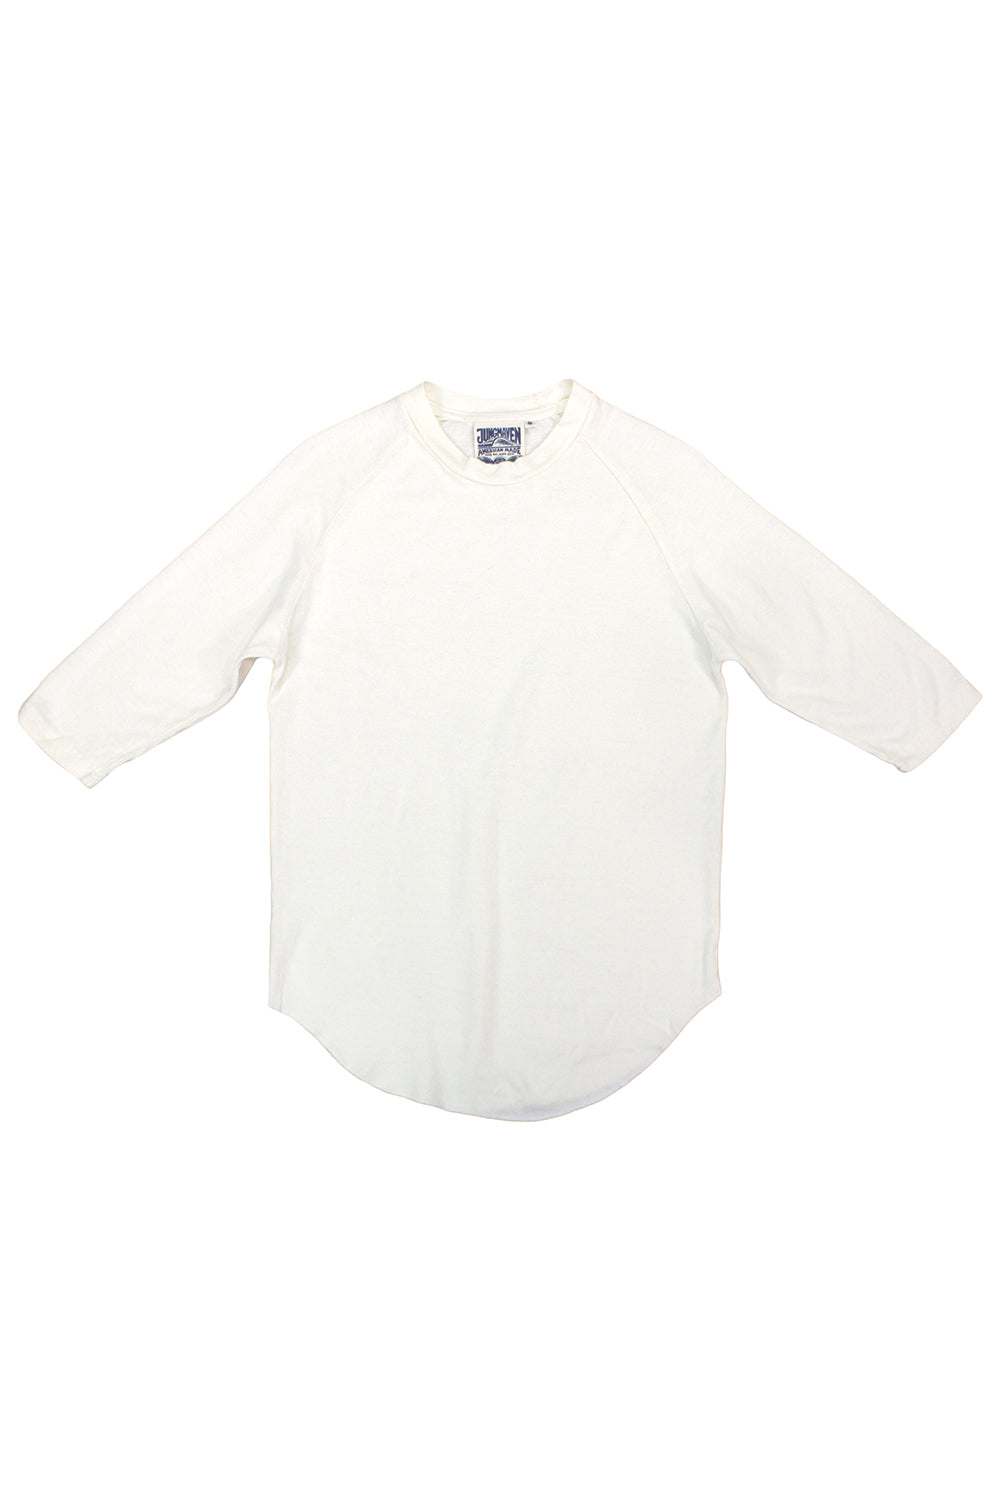 Solid Raglan 3/4 Sleeve | Jungmaven Hemp Clothing & Accessories / Color: Washed White